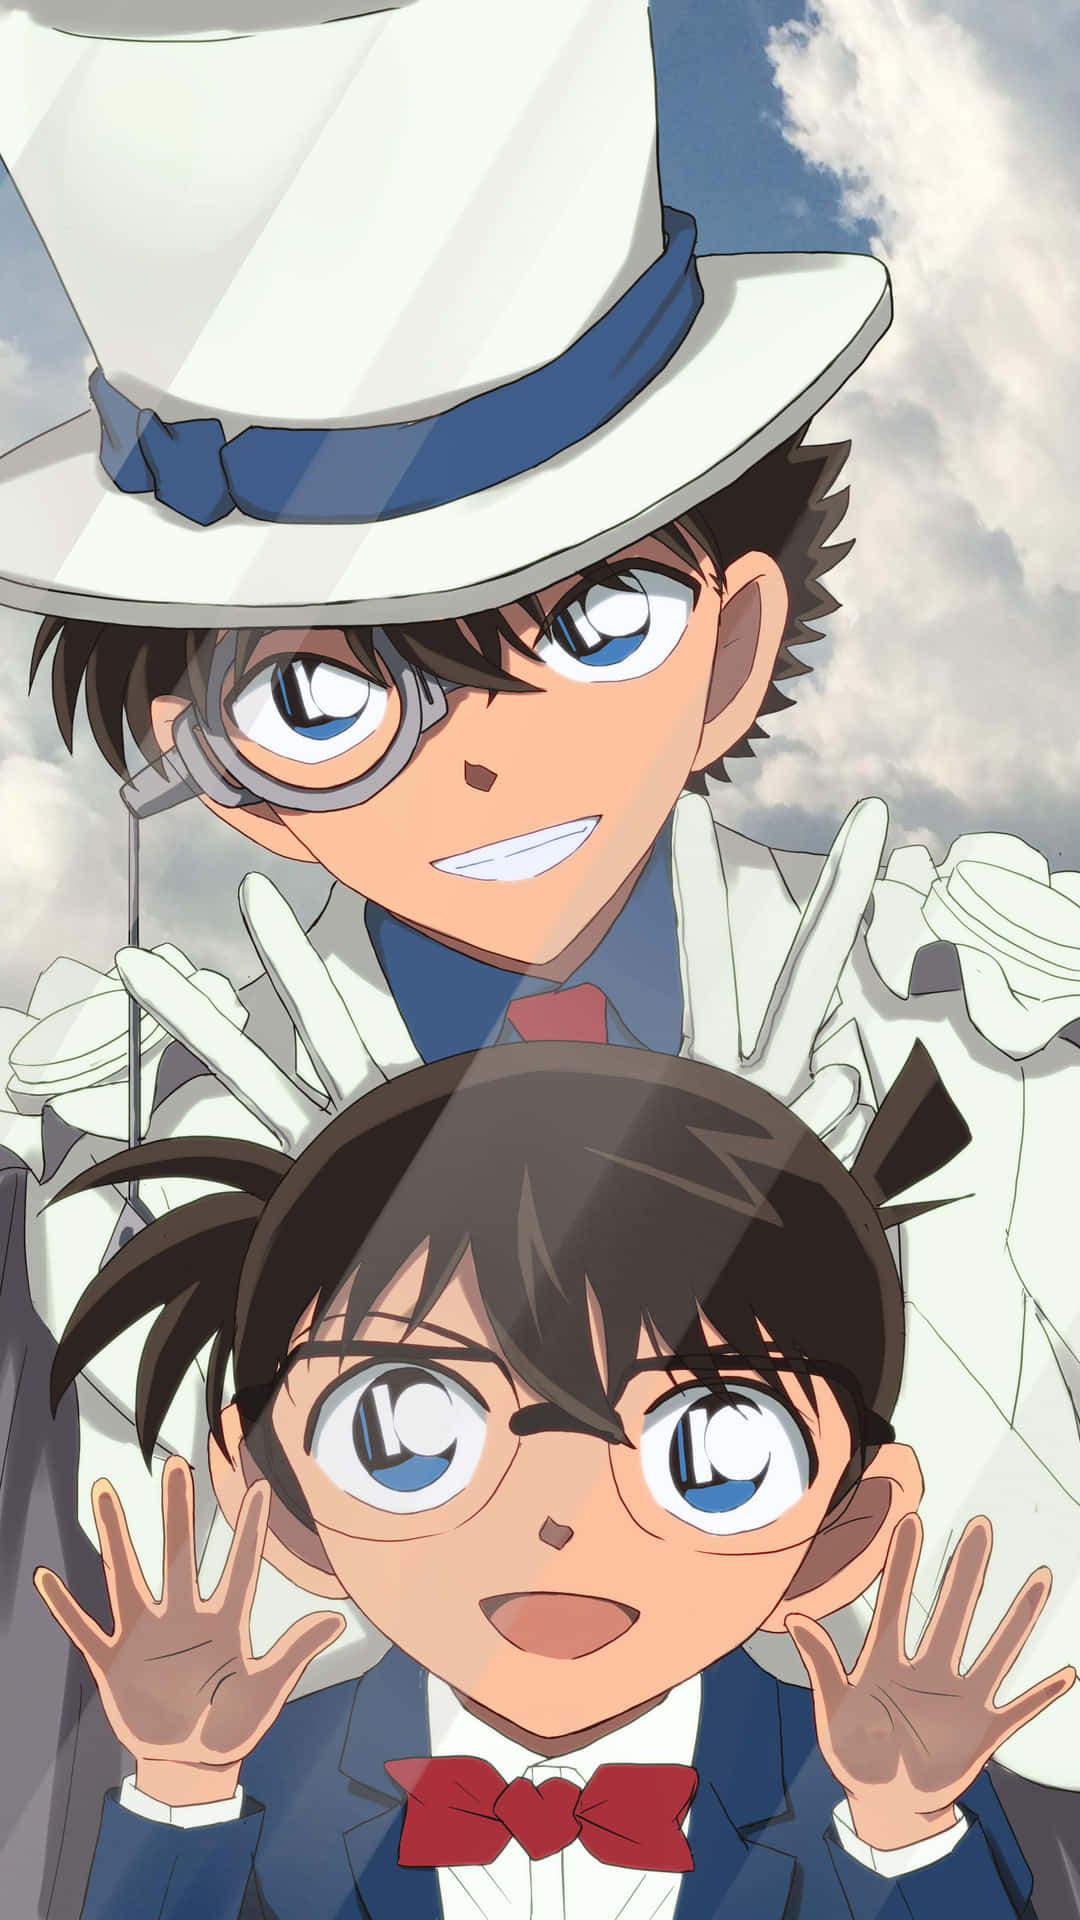 Detective Conan and the Mysterious Case of the Missing Clues